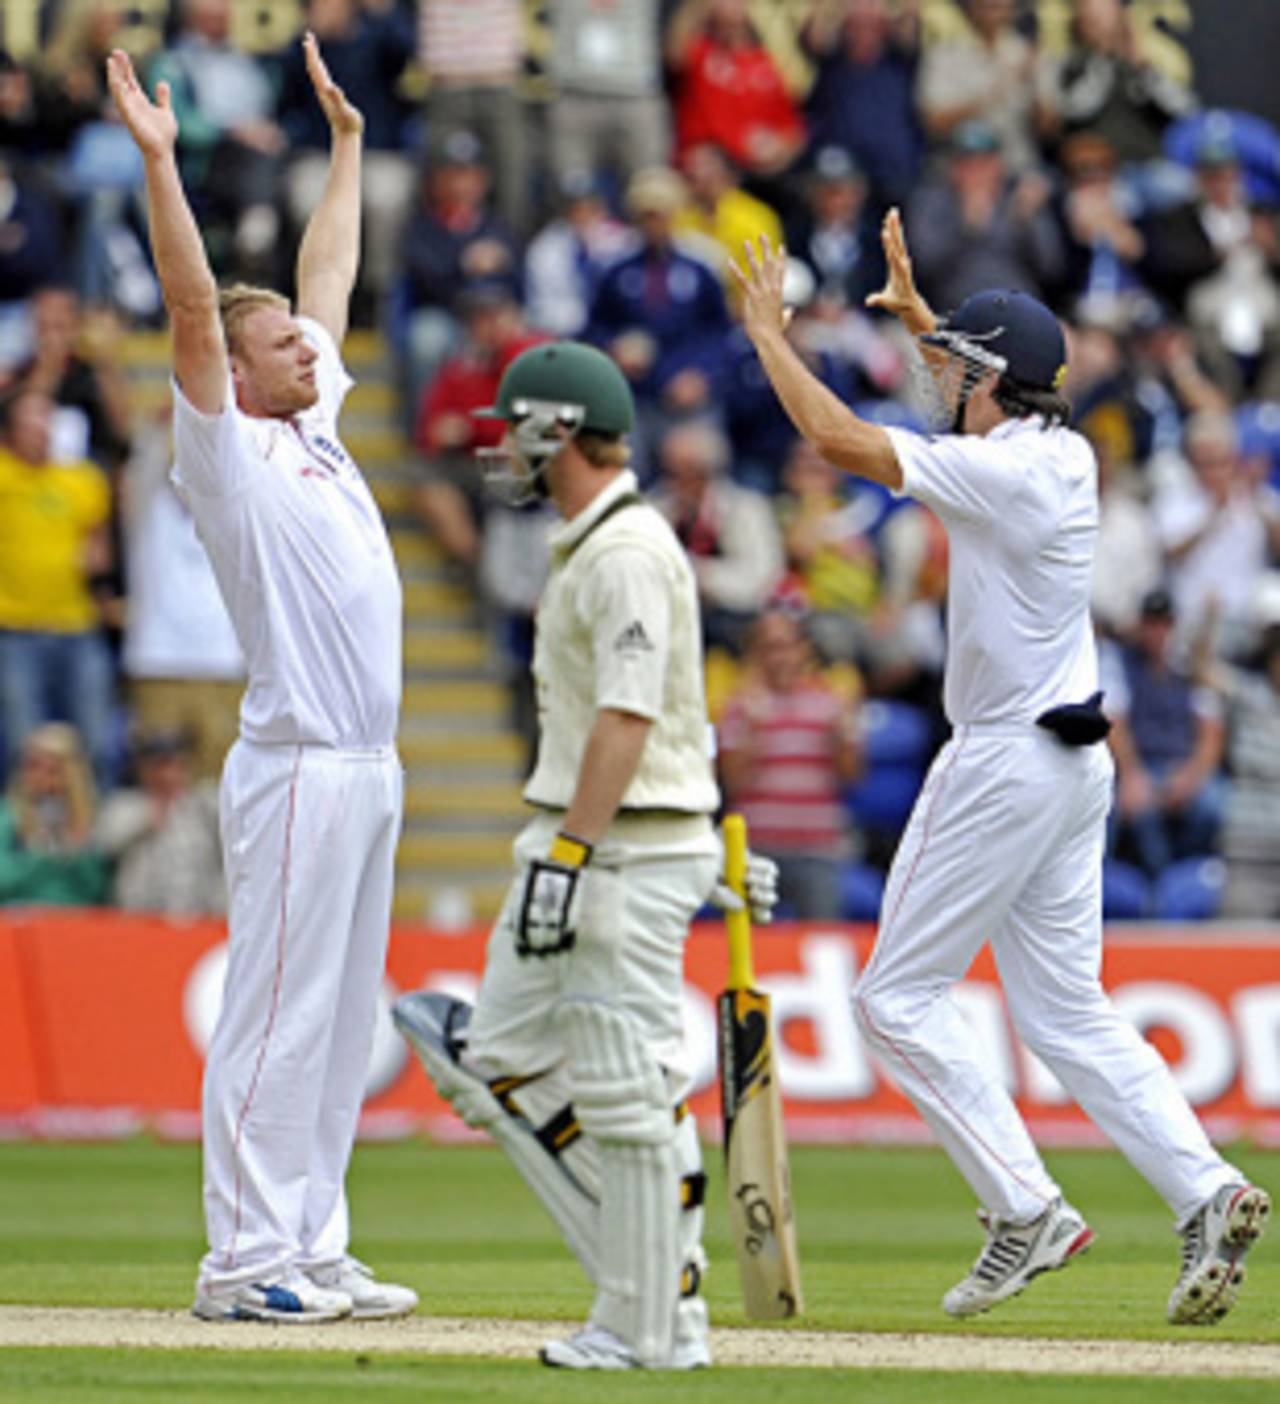 Andrew Flintoff, arms aloft, celebrates the wicket of Phillip Hughes, England v Australia, 1st Test, Cardiff, 2nd day, July 9, 2009